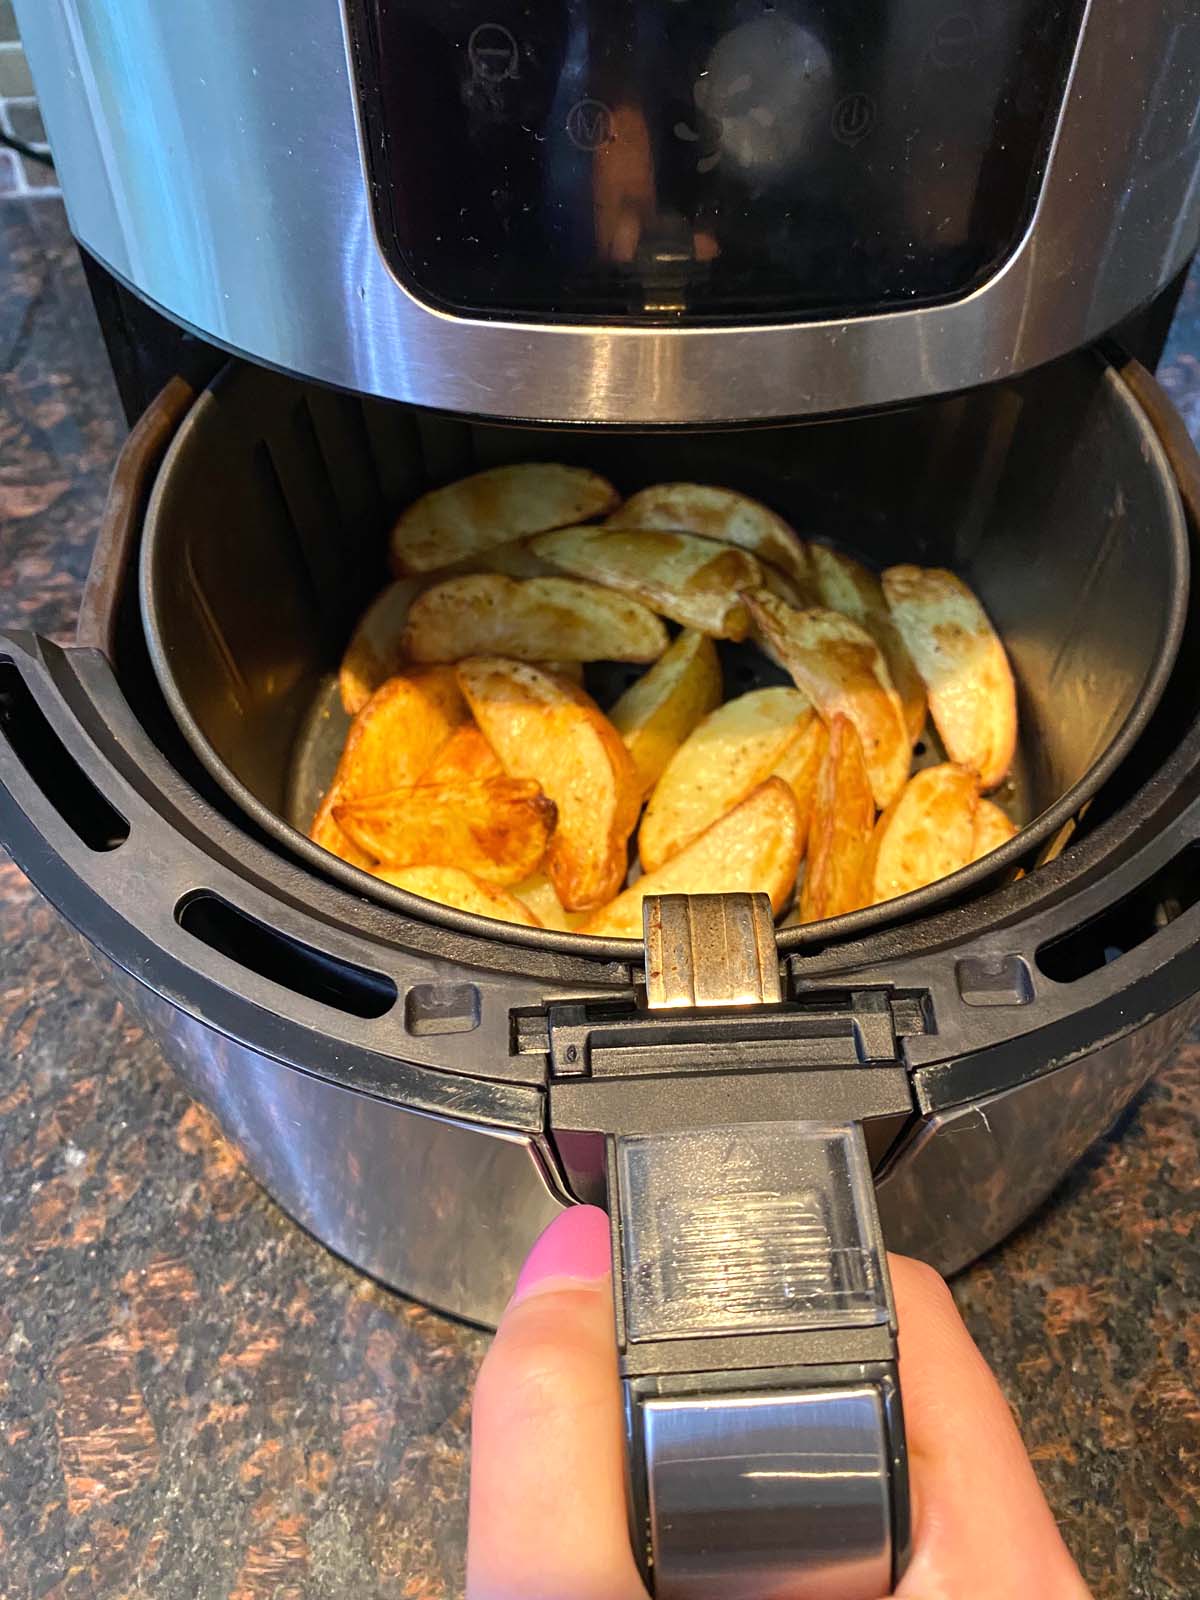 Cooked potato wedges in the air fryer.